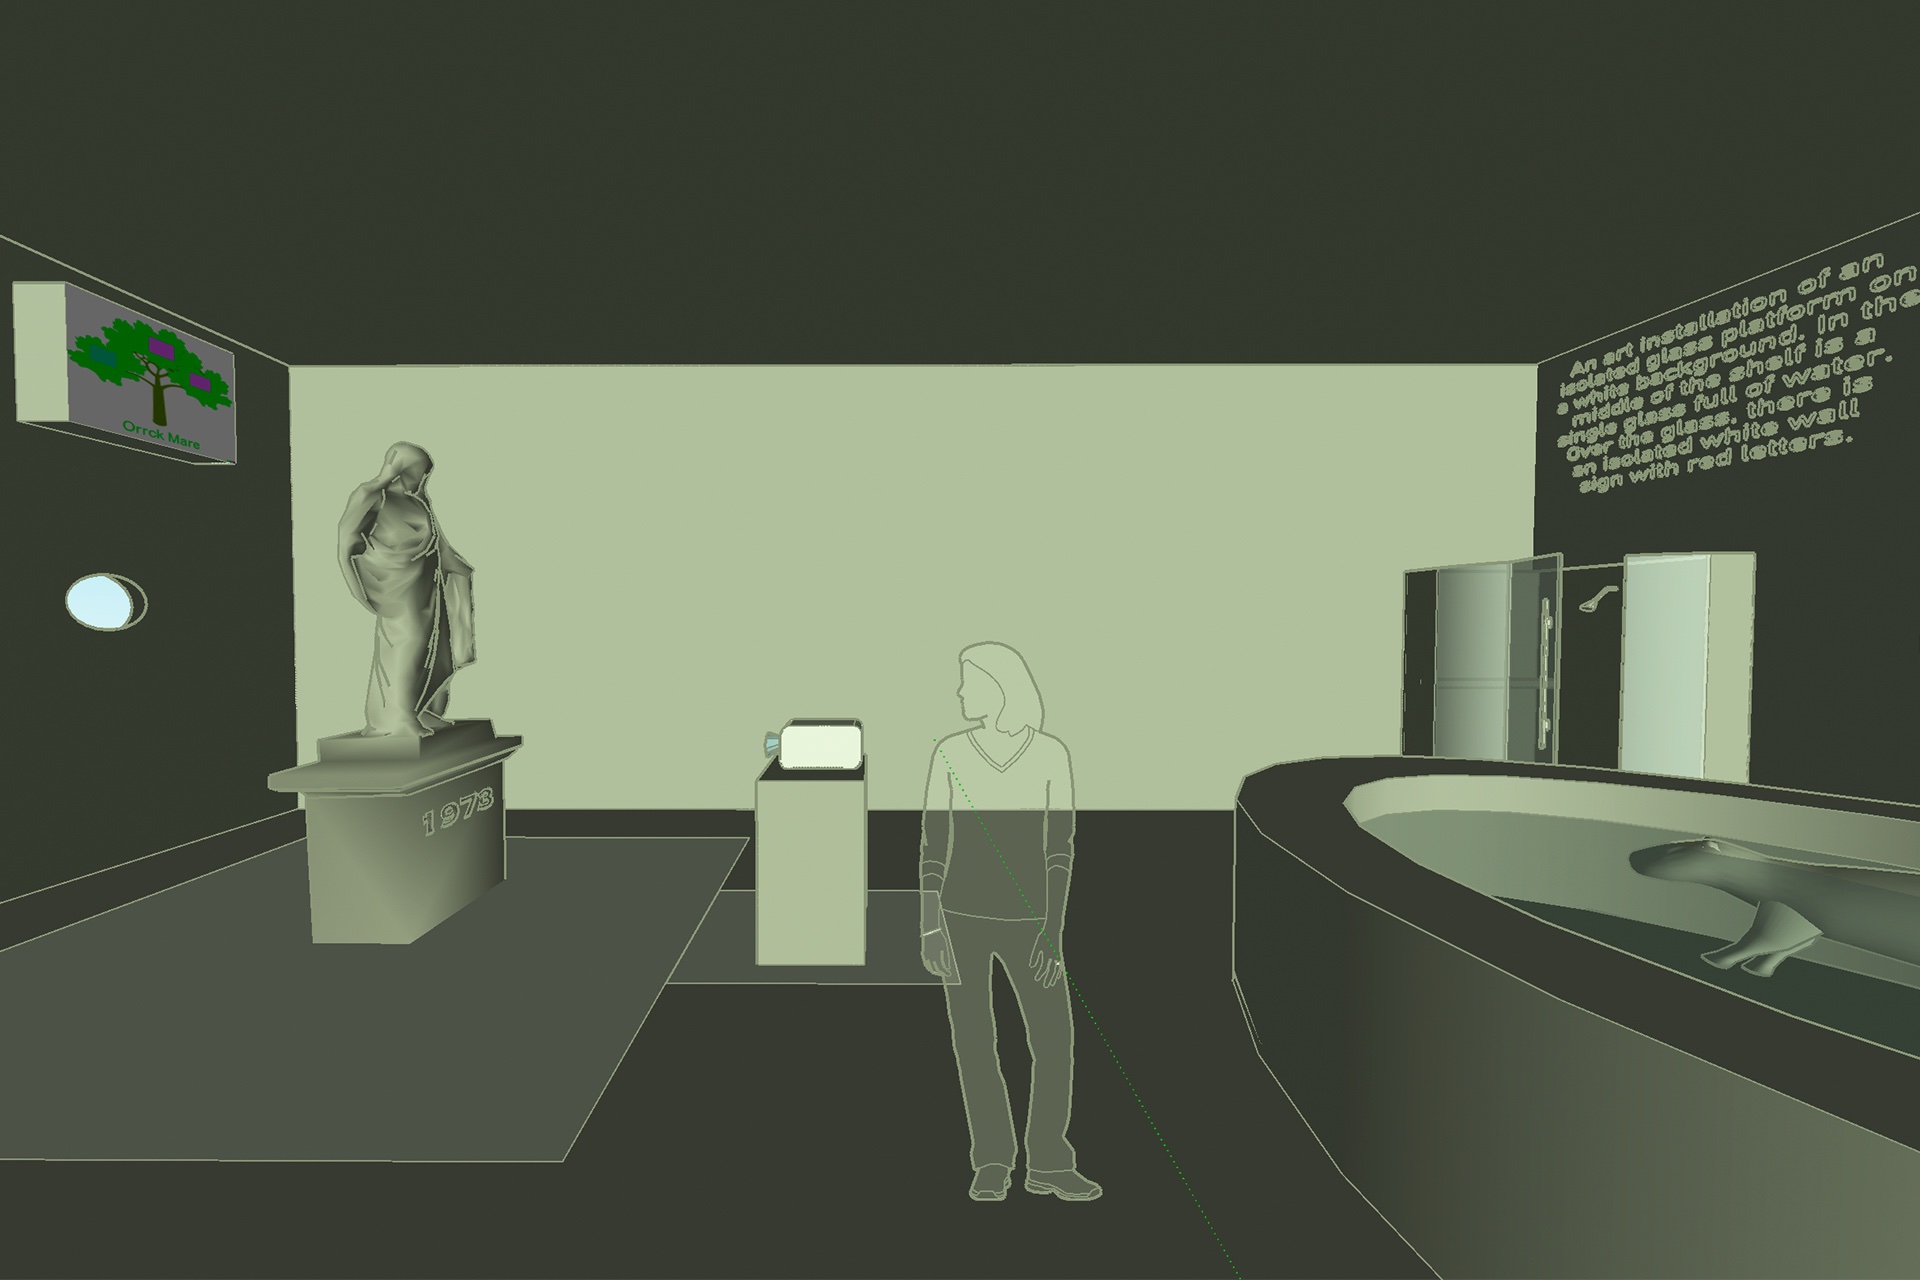 Virtual room with deselected greyish walls in Google Sketchup. All objects and characters inside the room are simply shaped and the same colour as the walls. 